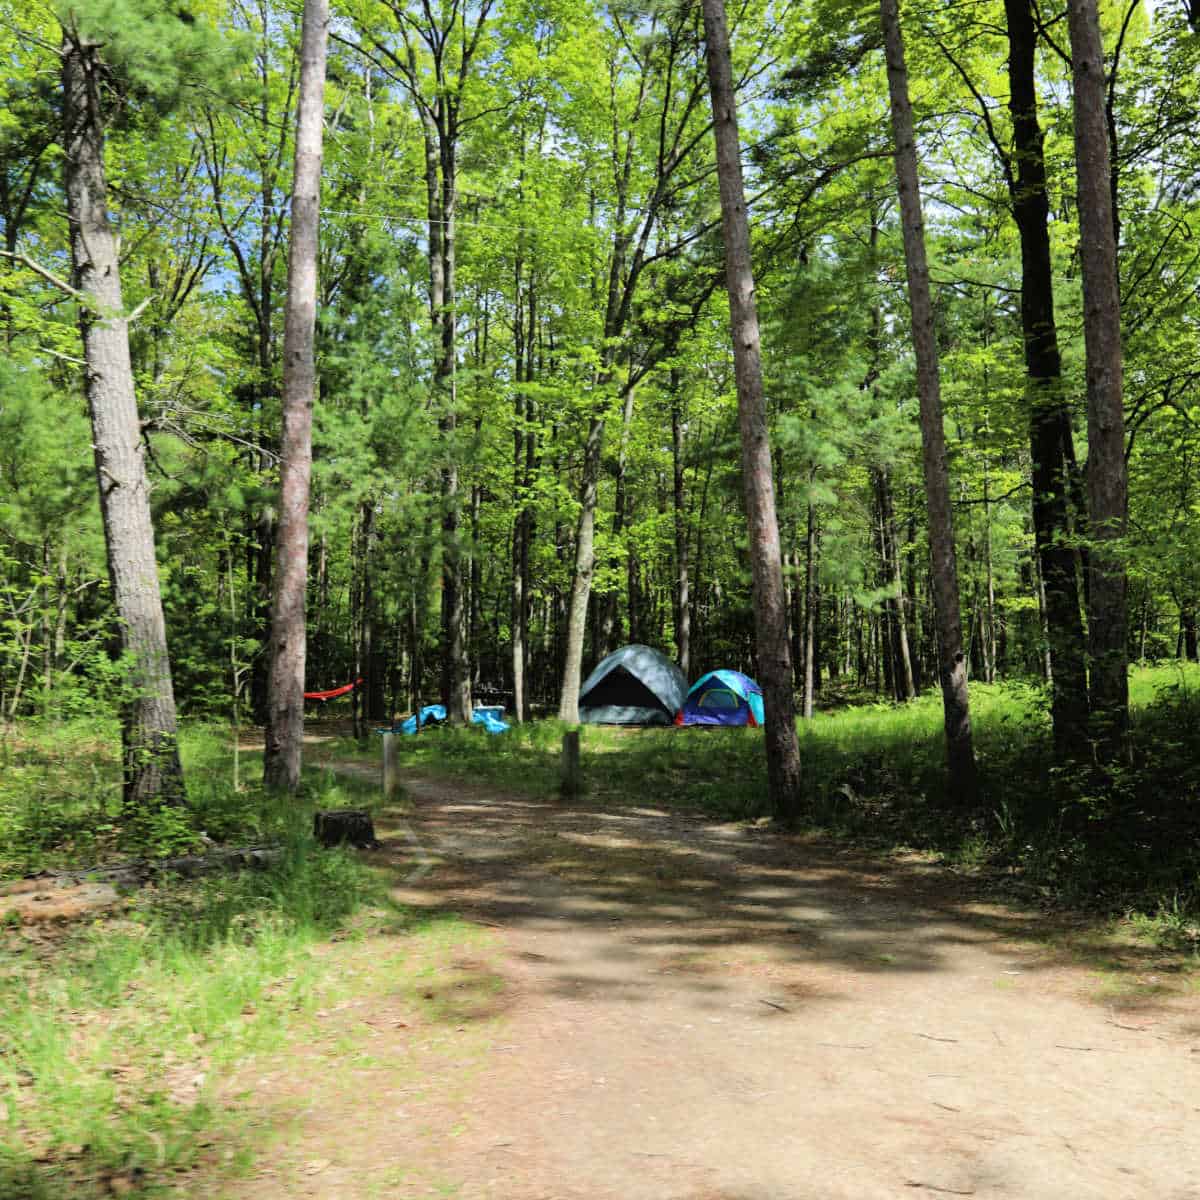 Campsite at D.H.Day Campground at Sleeping Bear Dunes National Lakeshore